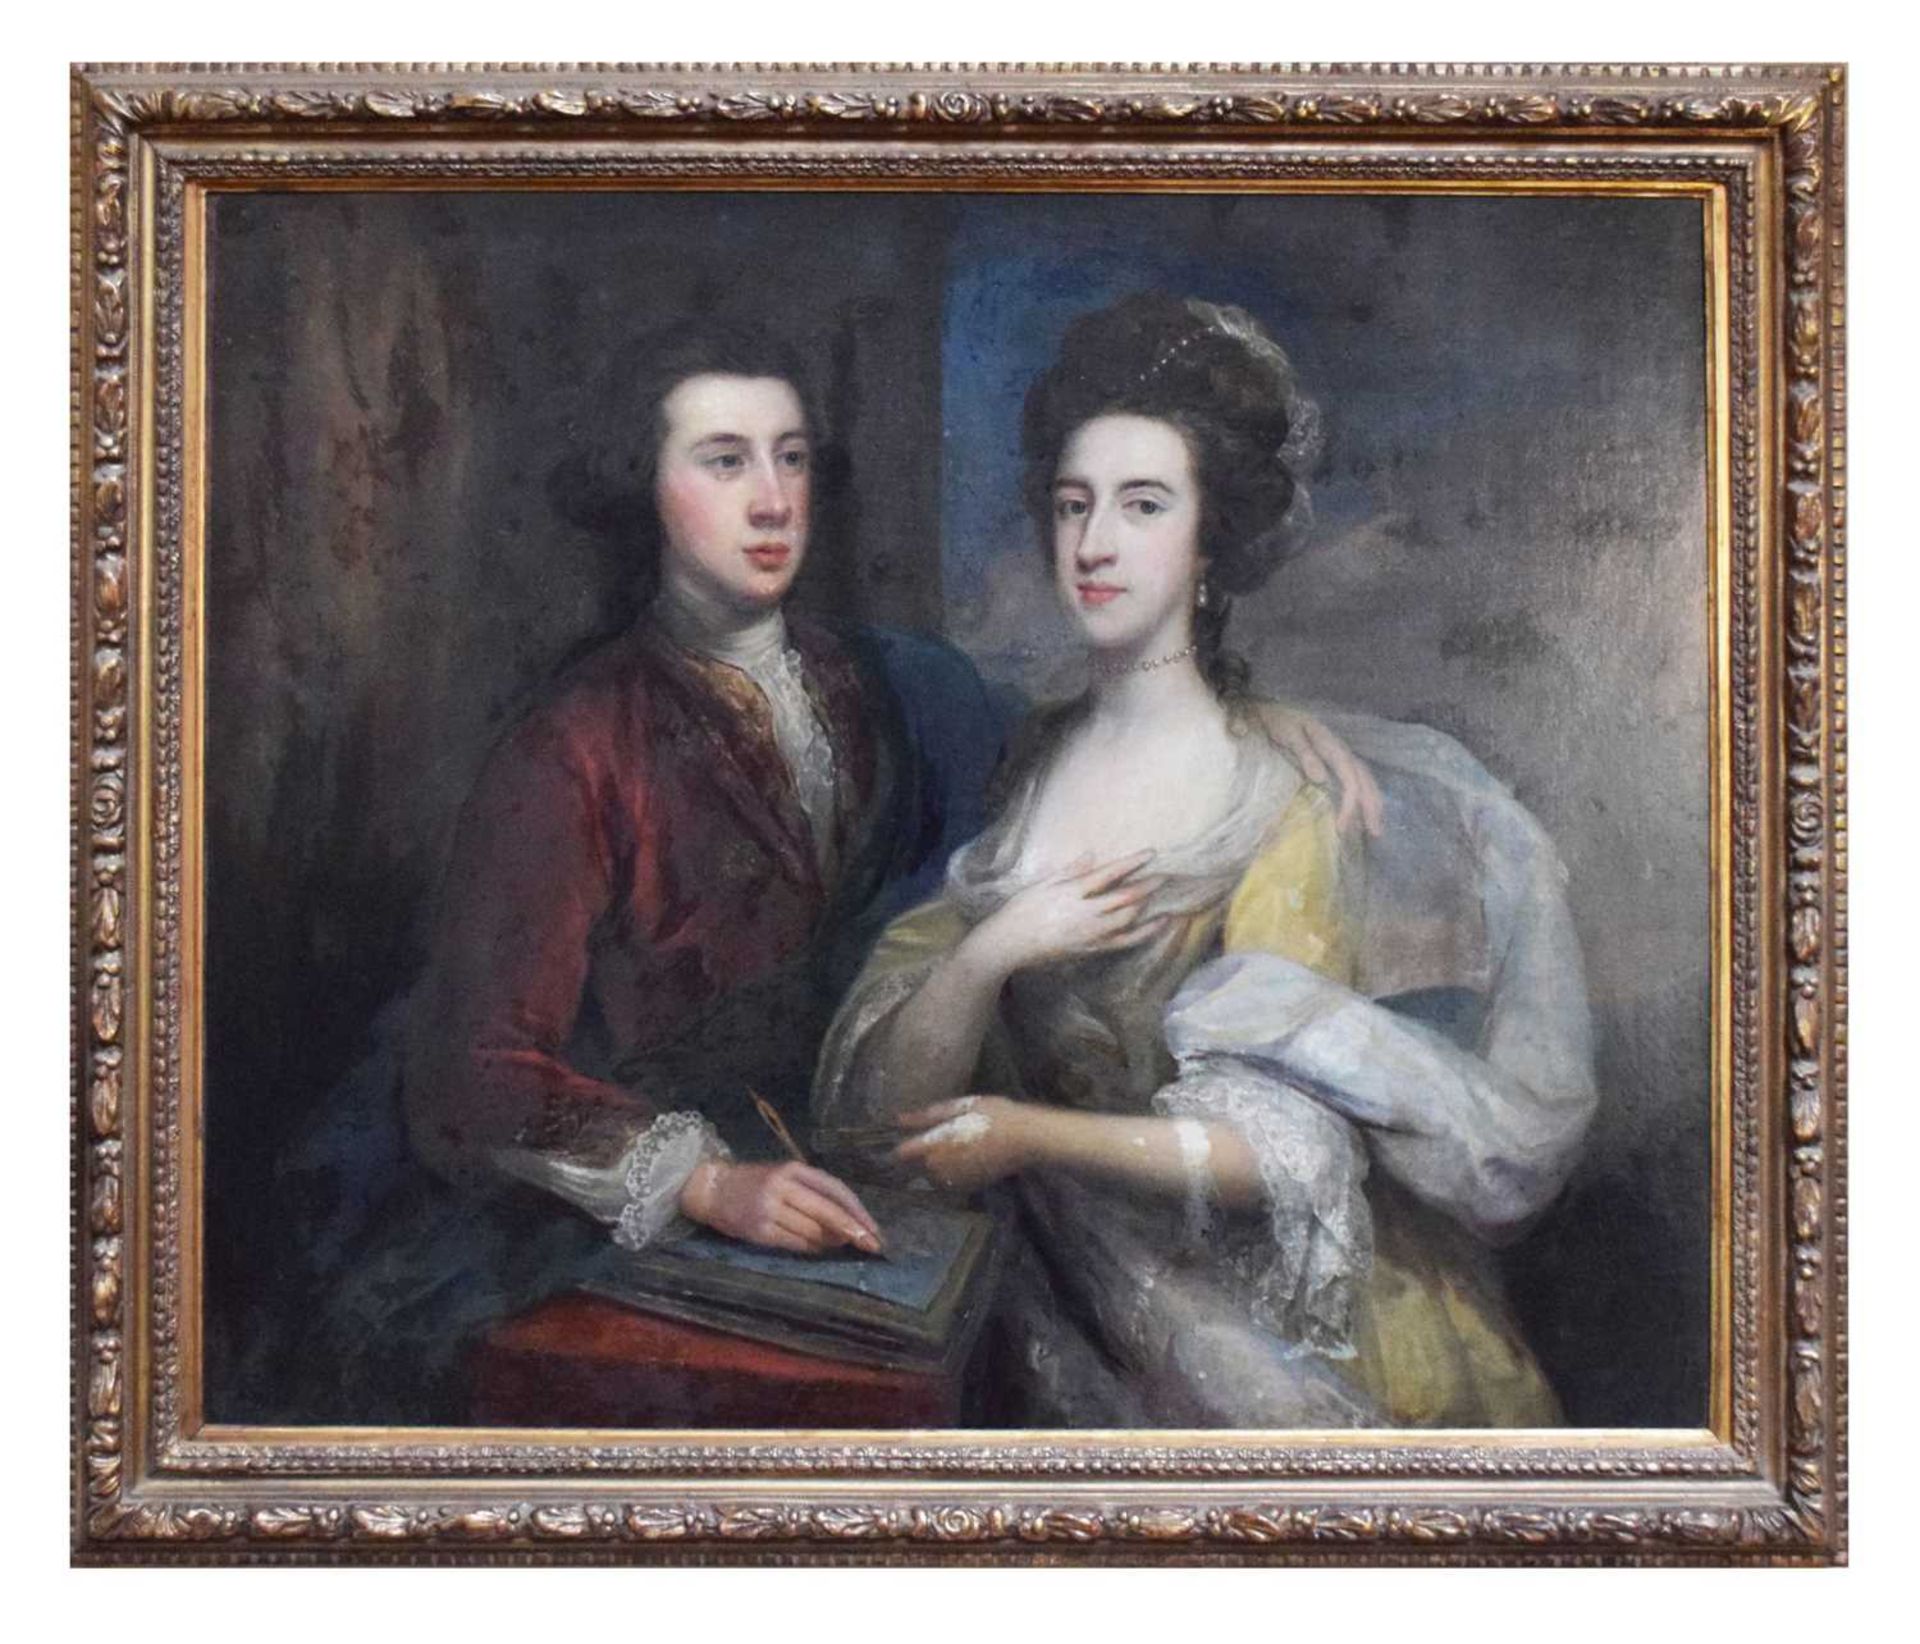 Circle of Arthur Pond, (circa1701-1758) - Oil on canvas, Henry and Susanna Hoare - Image 16 of 33